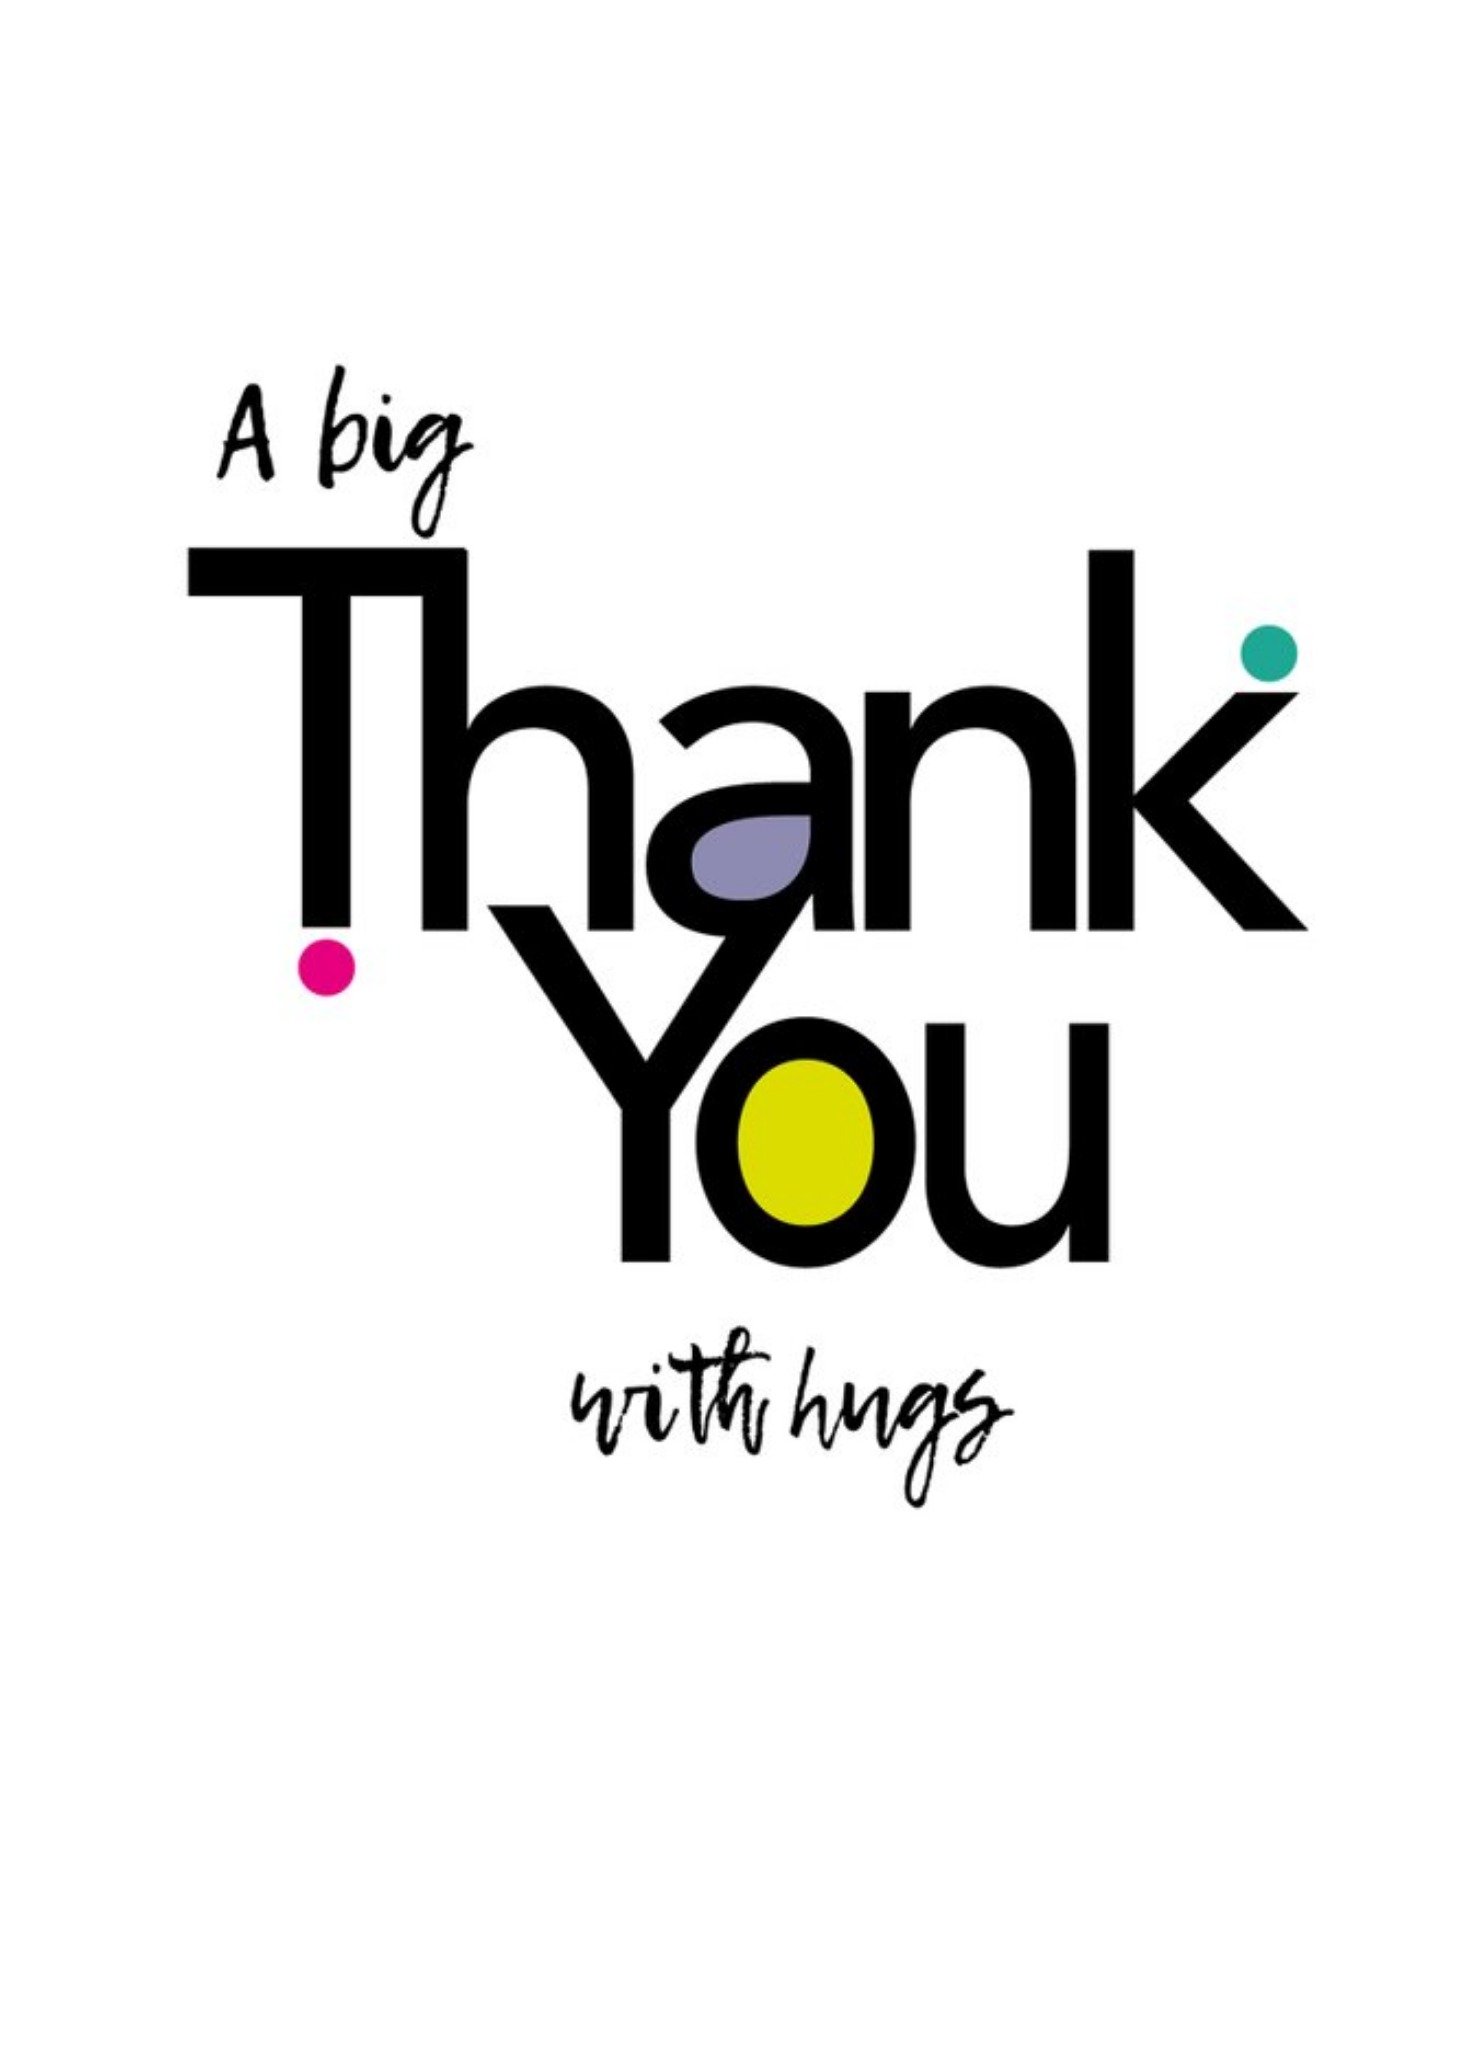 Moonpig Modern Typographic A Big Thank You With Hugs Thank You Card Ecard